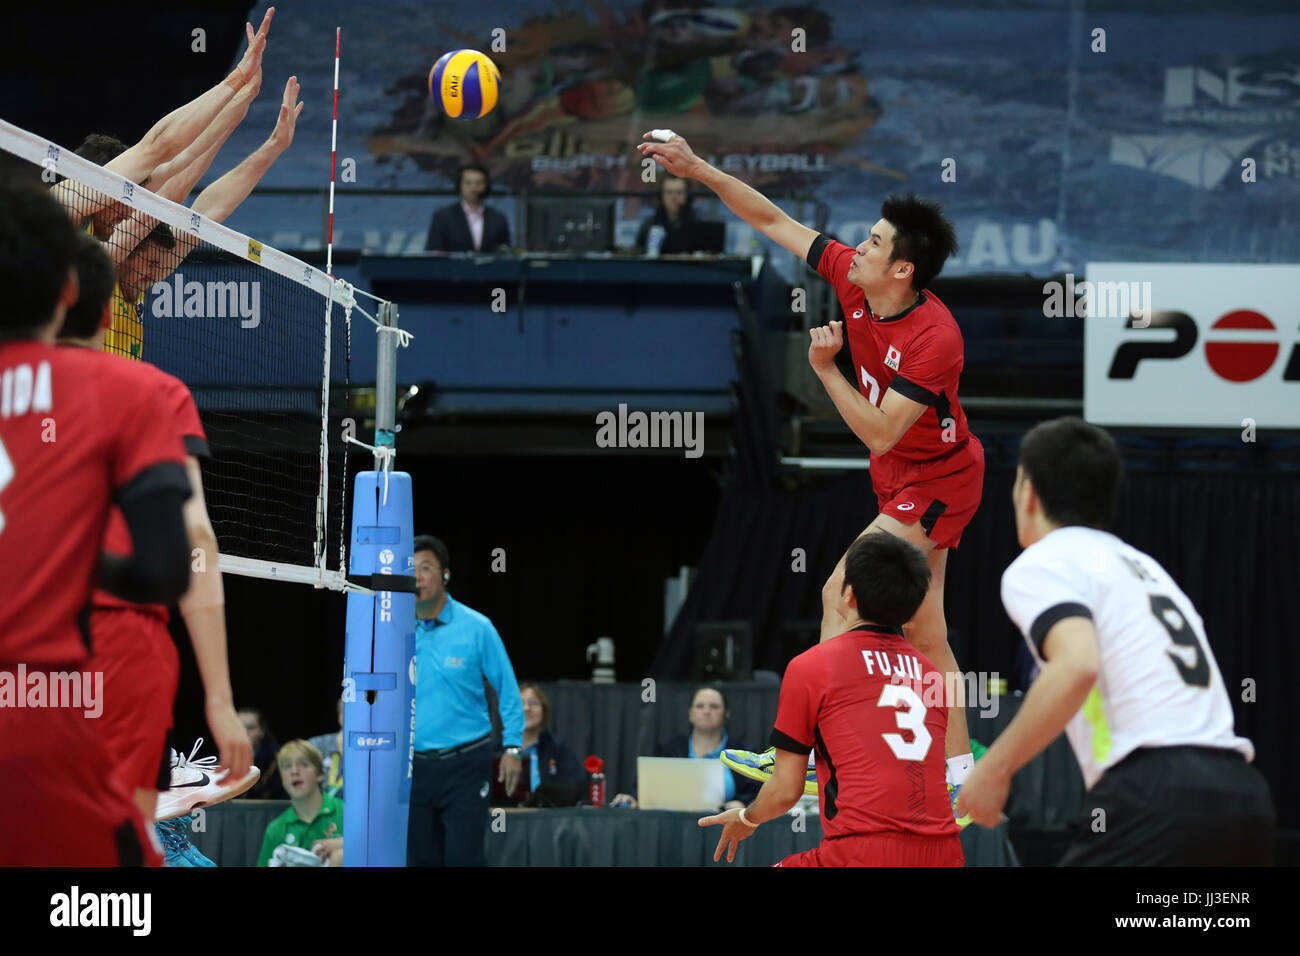 Canberra, Australia. 15th July, 2017. Takashi Dekita (JPN) Volleyball : 2018 FIVB Volleyball Men's World Championship Asian qualification Final round Pool B match between Japan and Australia at AIS Arena in Canberra, Australia . Credit: Takahisa Hirano/AFLO/Alamy Live News Stock Photo